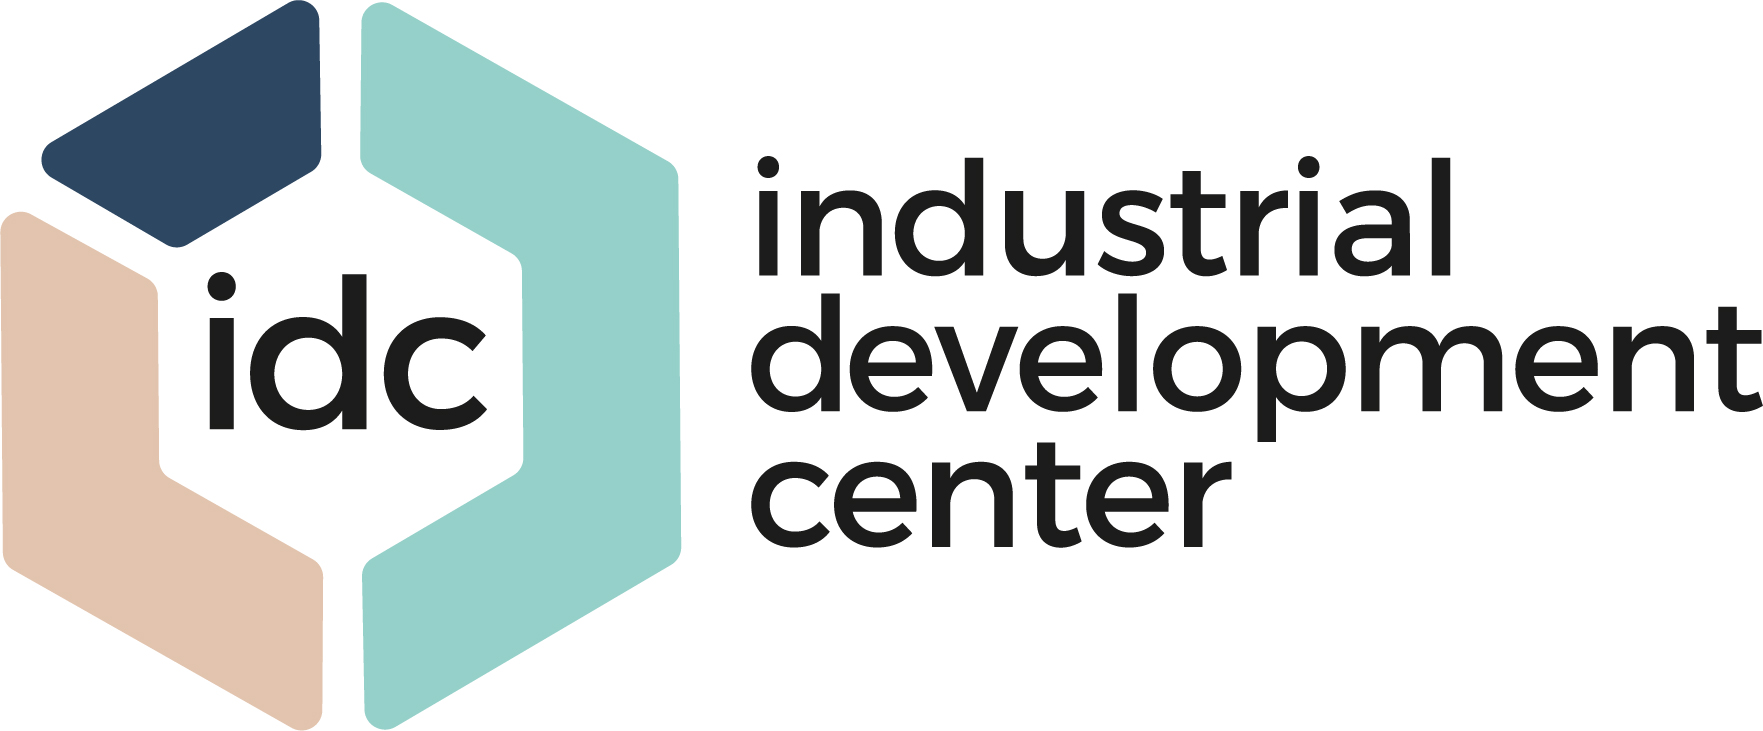 logo with industrial development center text, shorted idc